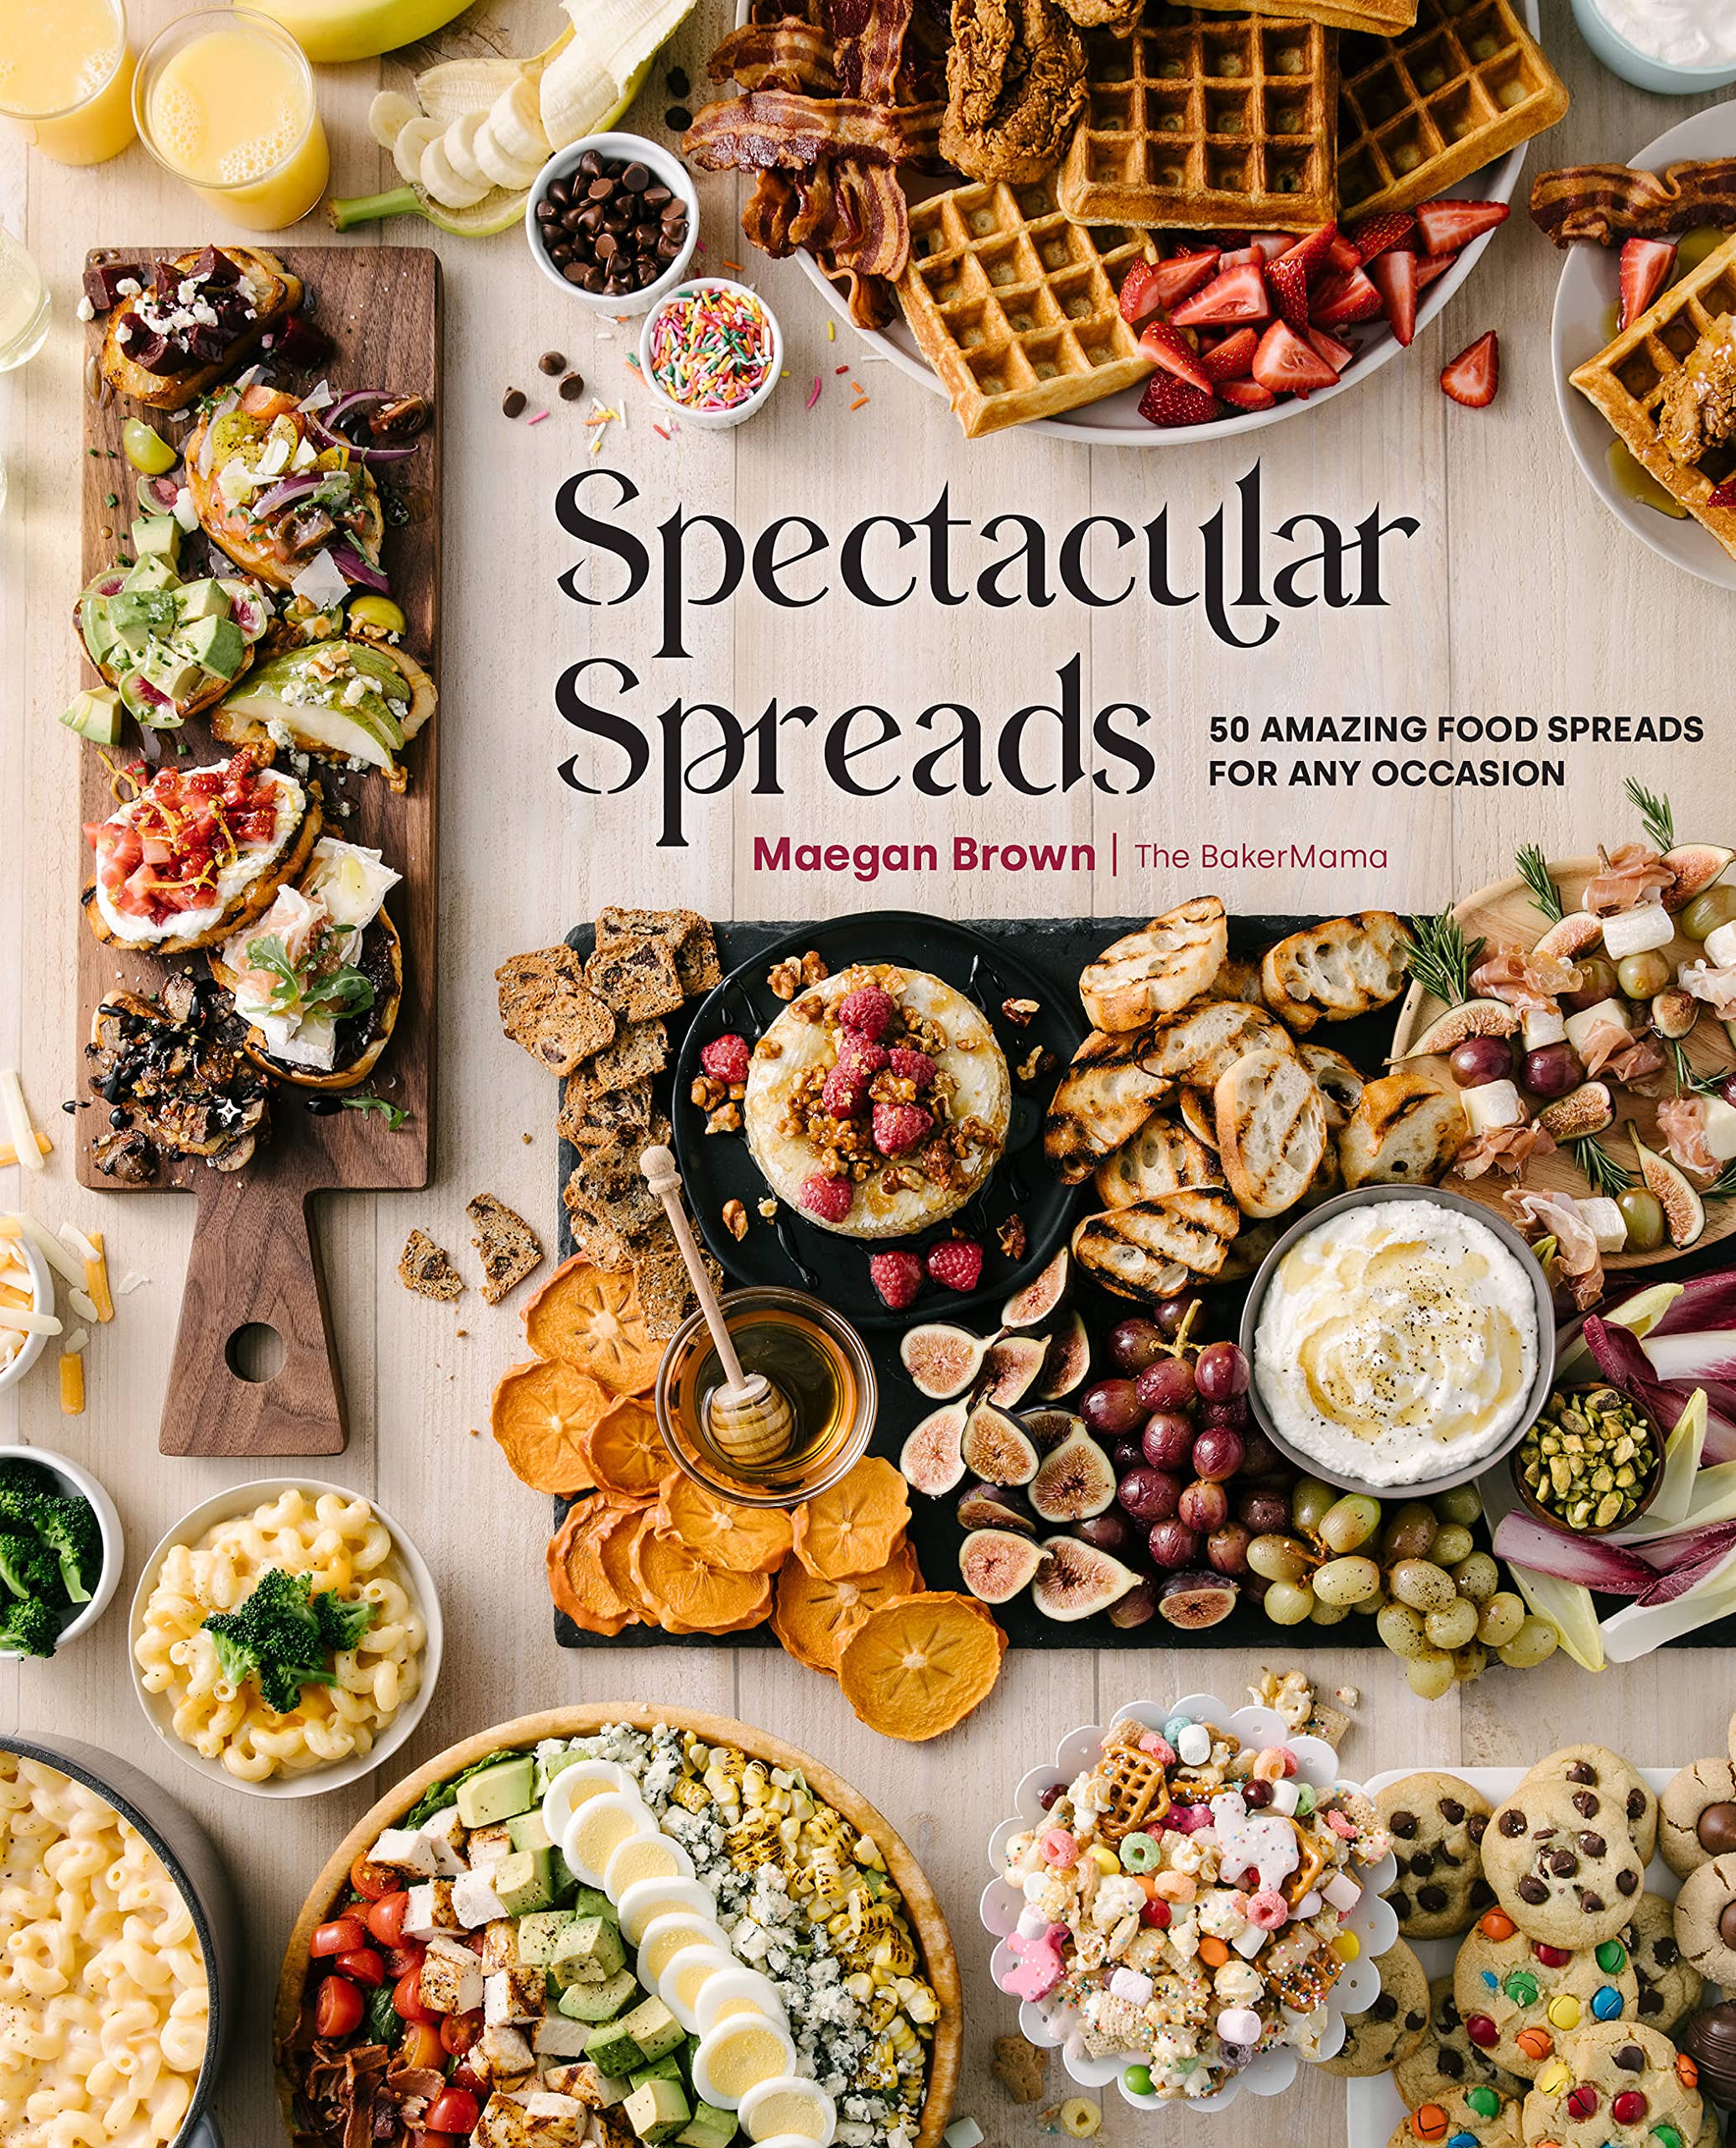 View Spectacular Spreads: 50 Amazing Food Spreads for Any Occasion by Maegan Brown